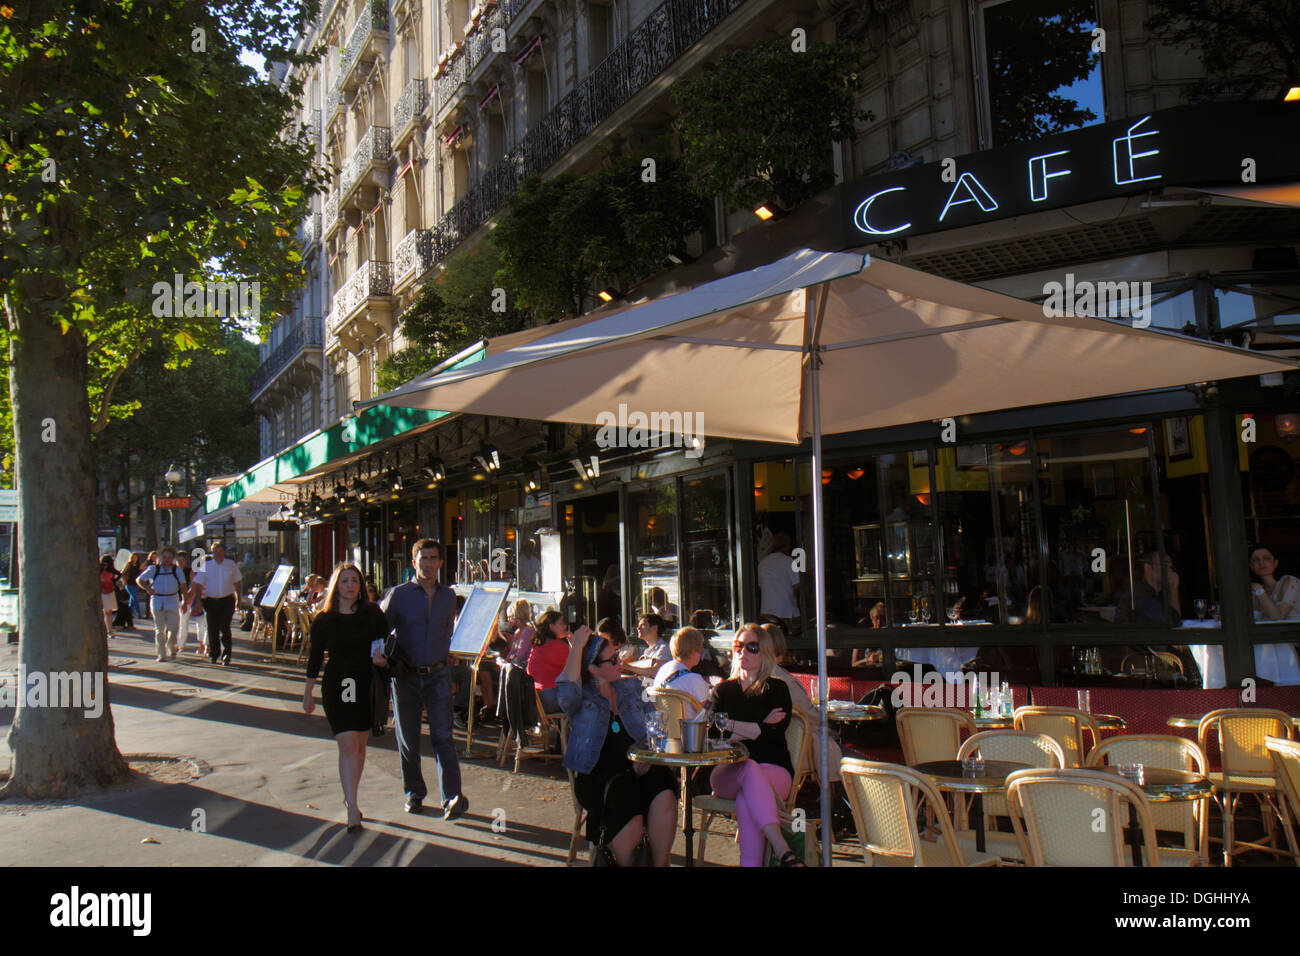 Paris France,Europe,French,8th arrondissement,Place Alma,Le Grand Corona,cafe,restaurant restaurants food dining eating out cafe cafes bistro,cuisine, Stock Photo